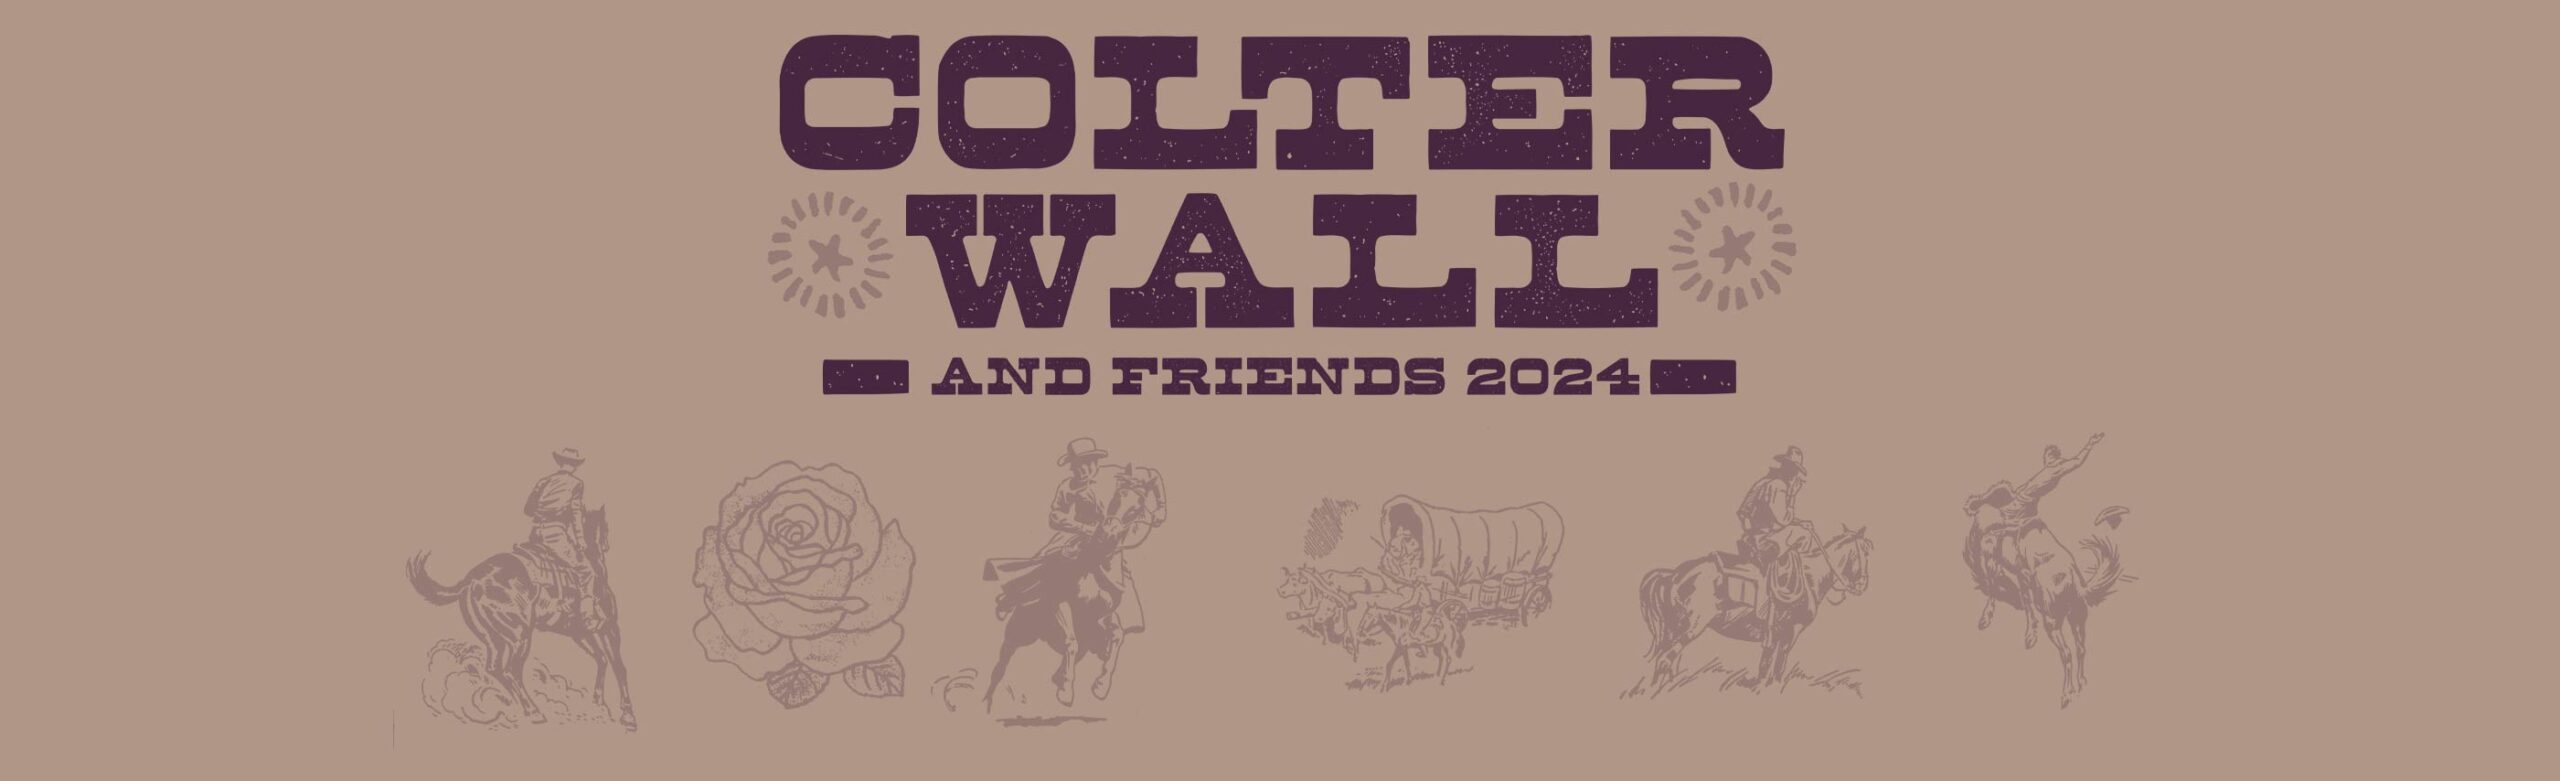 Colter Wall Adds Second Show at KettleHouse Amphitheater Image